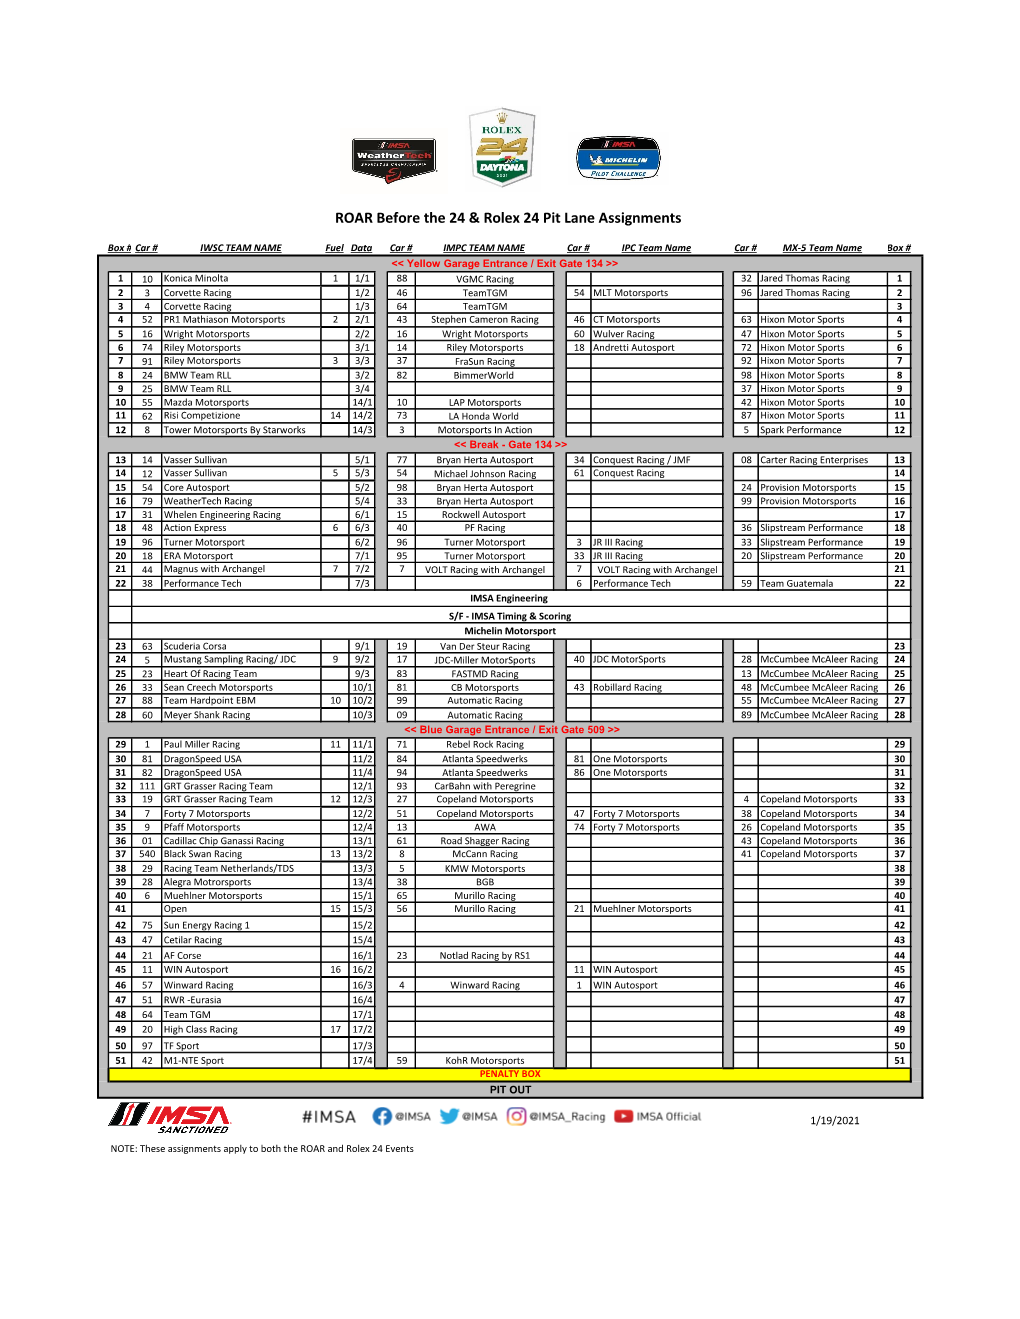 ROAR Before the 24 & Rolex 24 Pit Lane Assignments